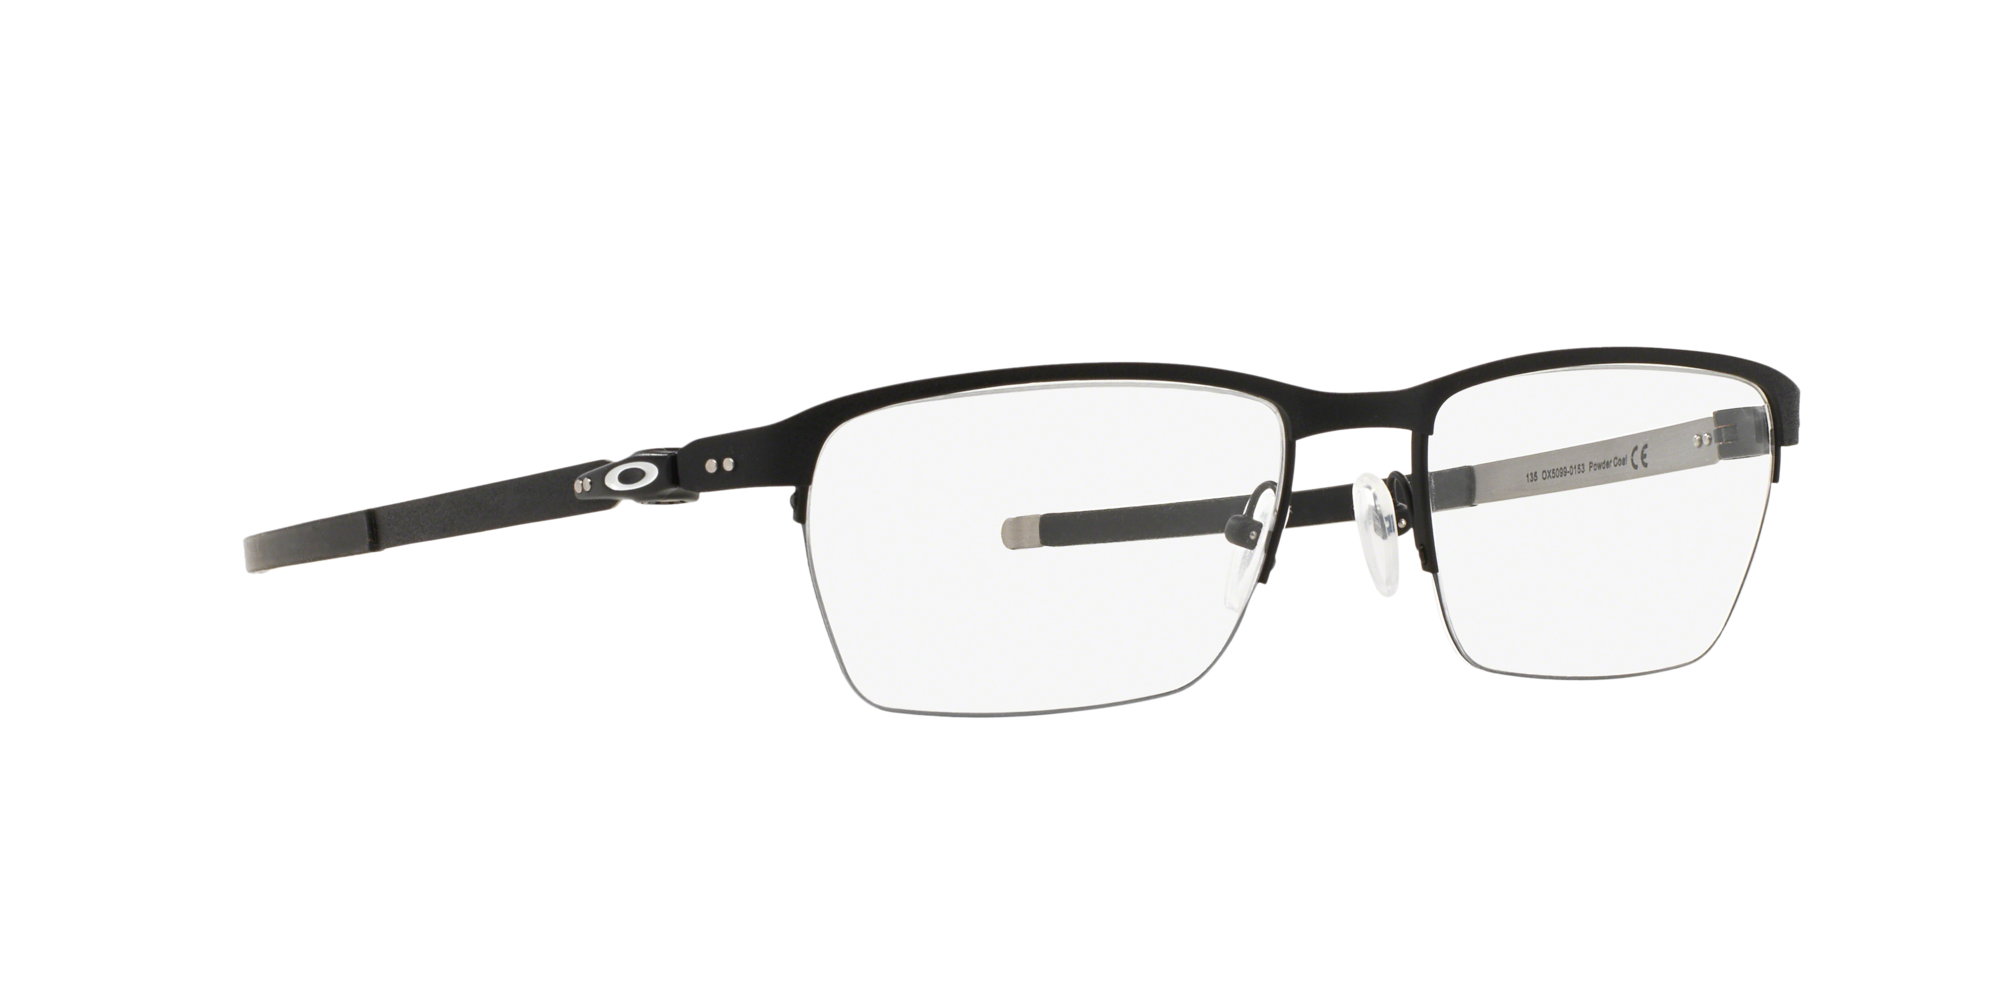 Angle_Right01 Oakley TinCup OX 5099 Glasses Transparent / Black